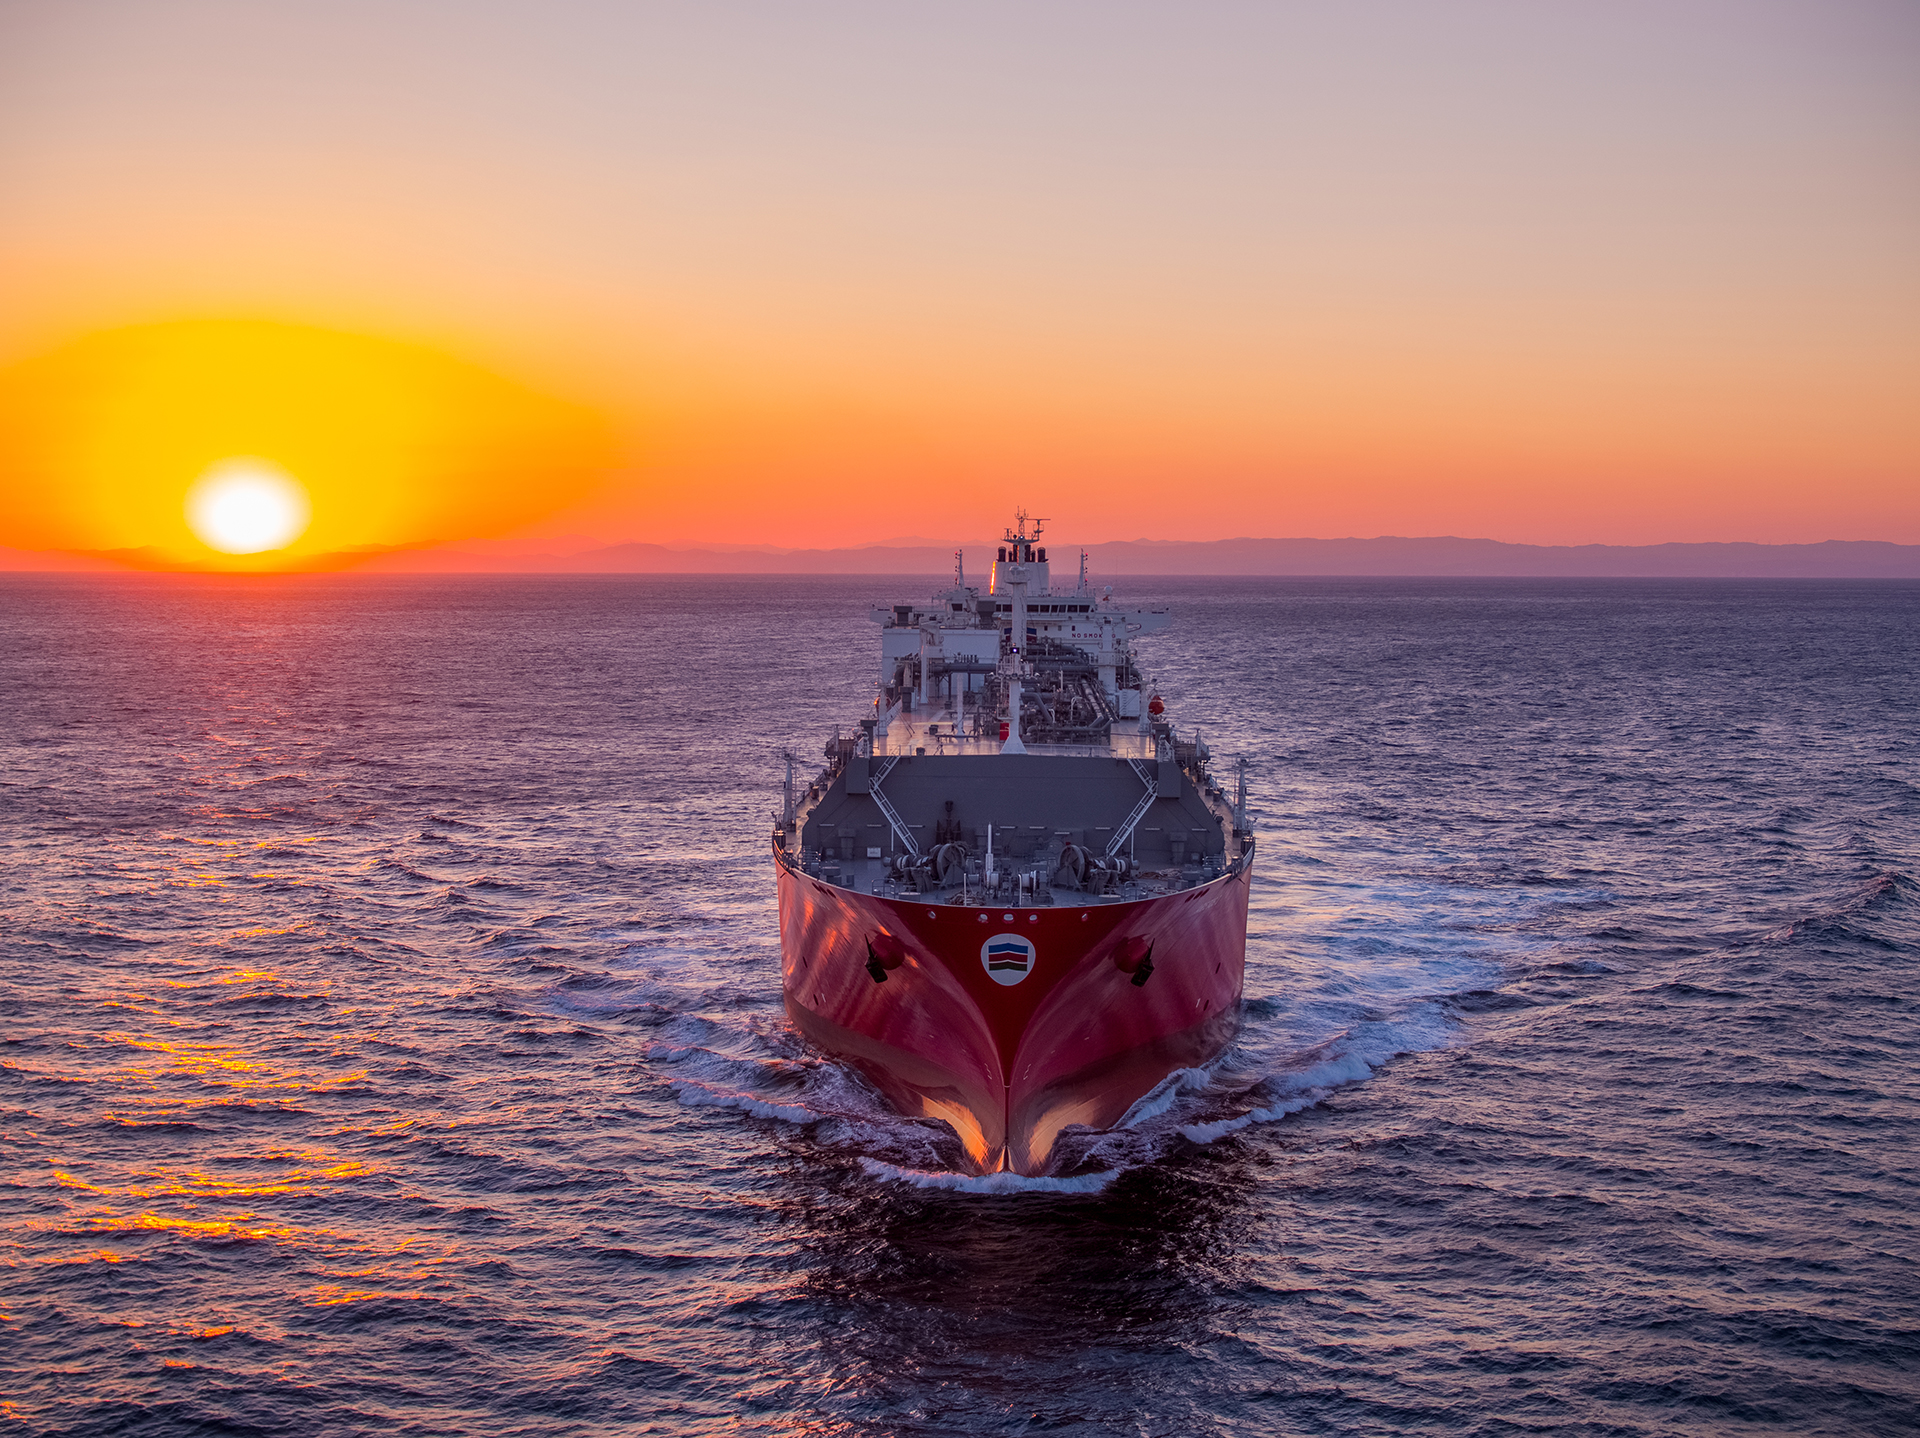 Capital Gas welcomes new LNG carrier